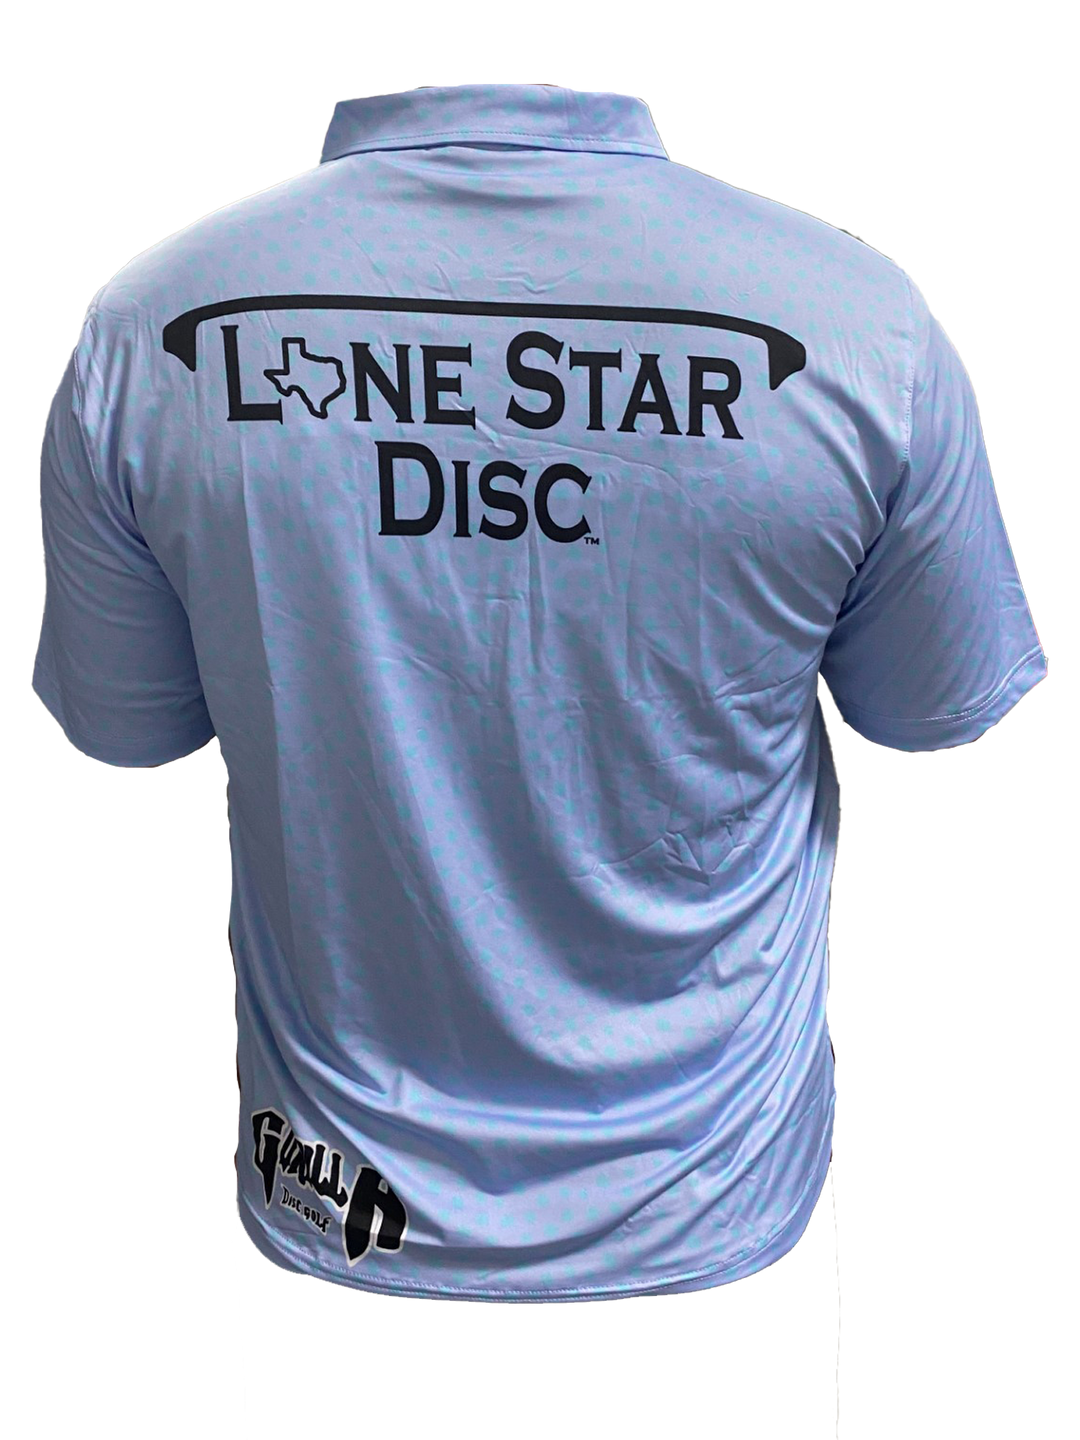 Lone Star Disc Purple Star Athletic Polo